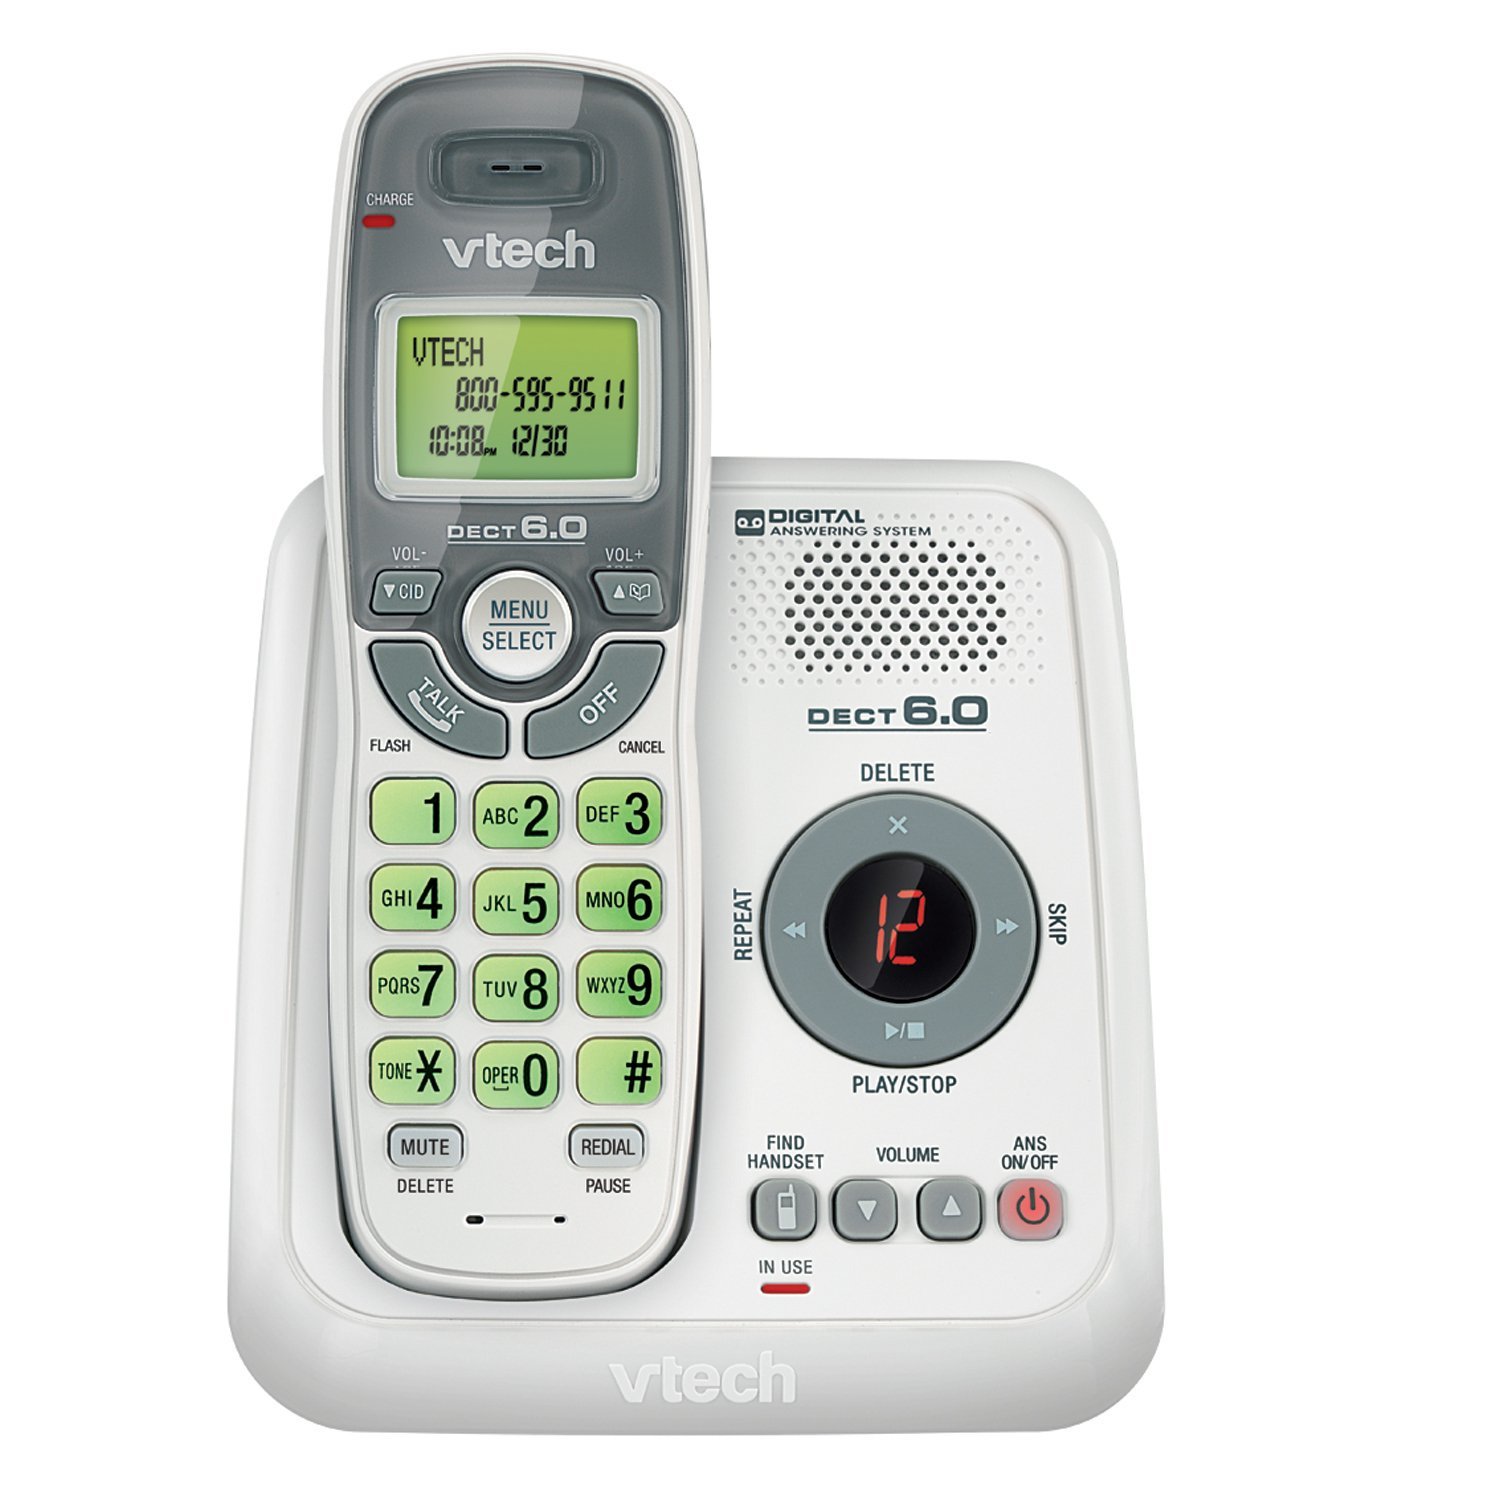 Amazon.com: VTech CS6124 DECT 6.0 Cordless Phone with Answering ...